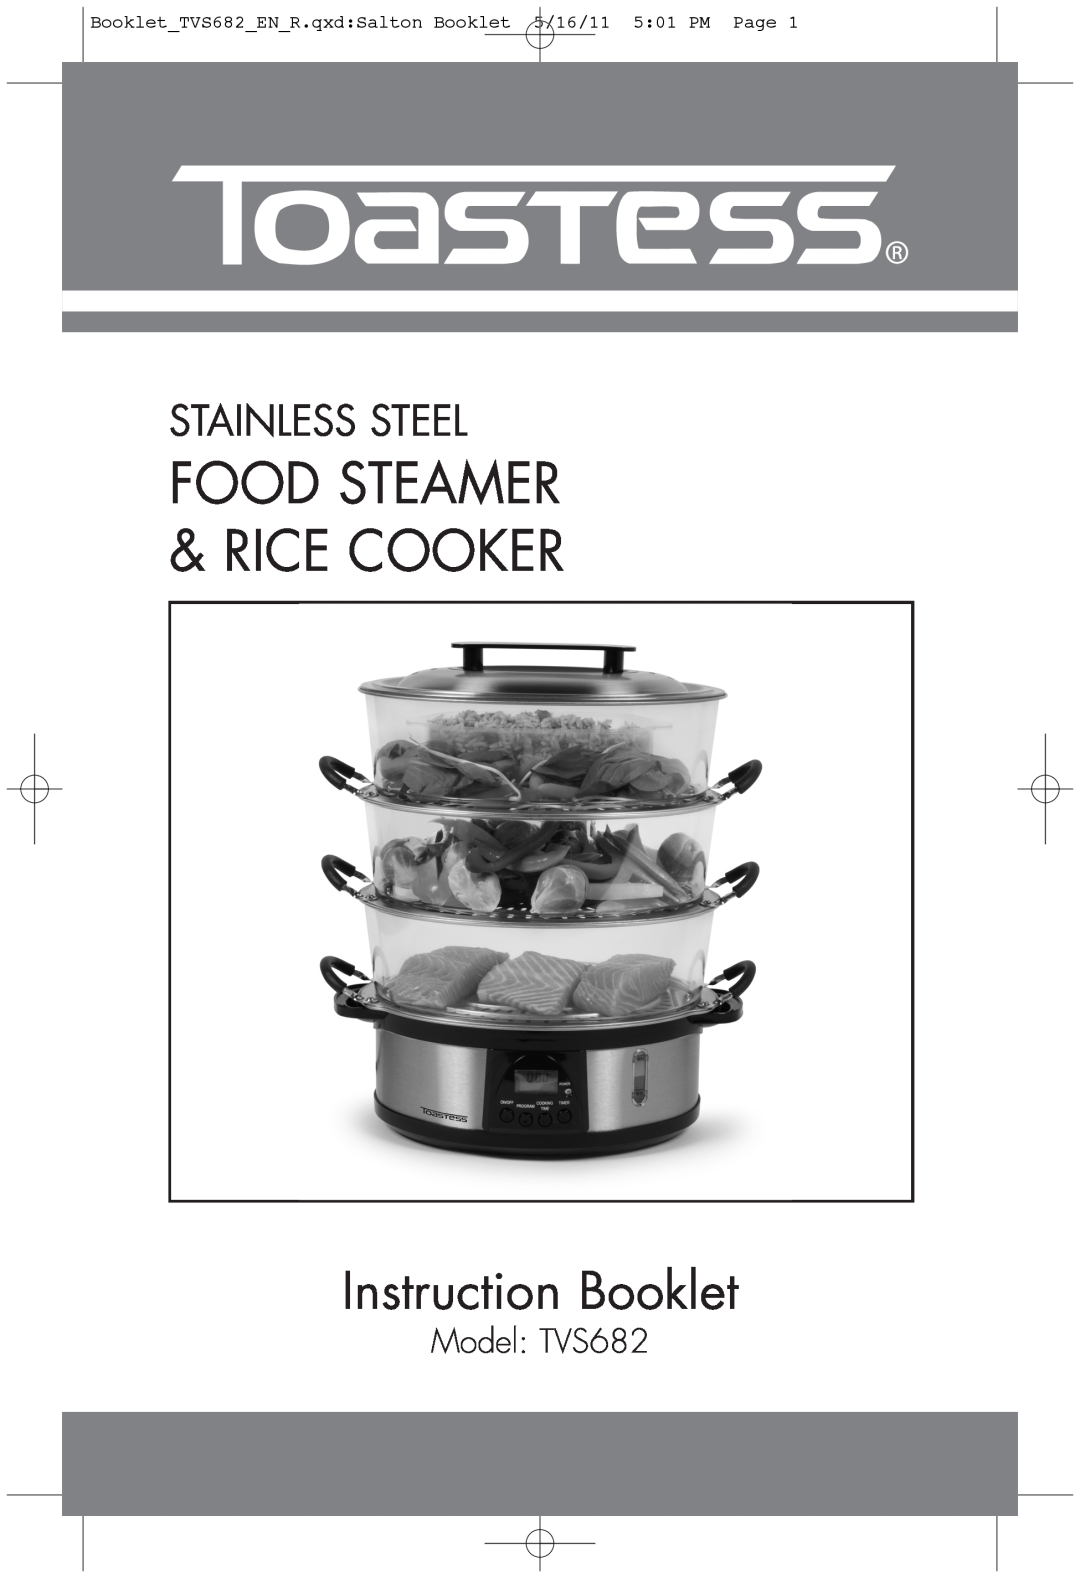 Toastess manual Model TVS682, FOOD STEAMER & RICE COOKER Instruction Booklet, Stainless Steel 